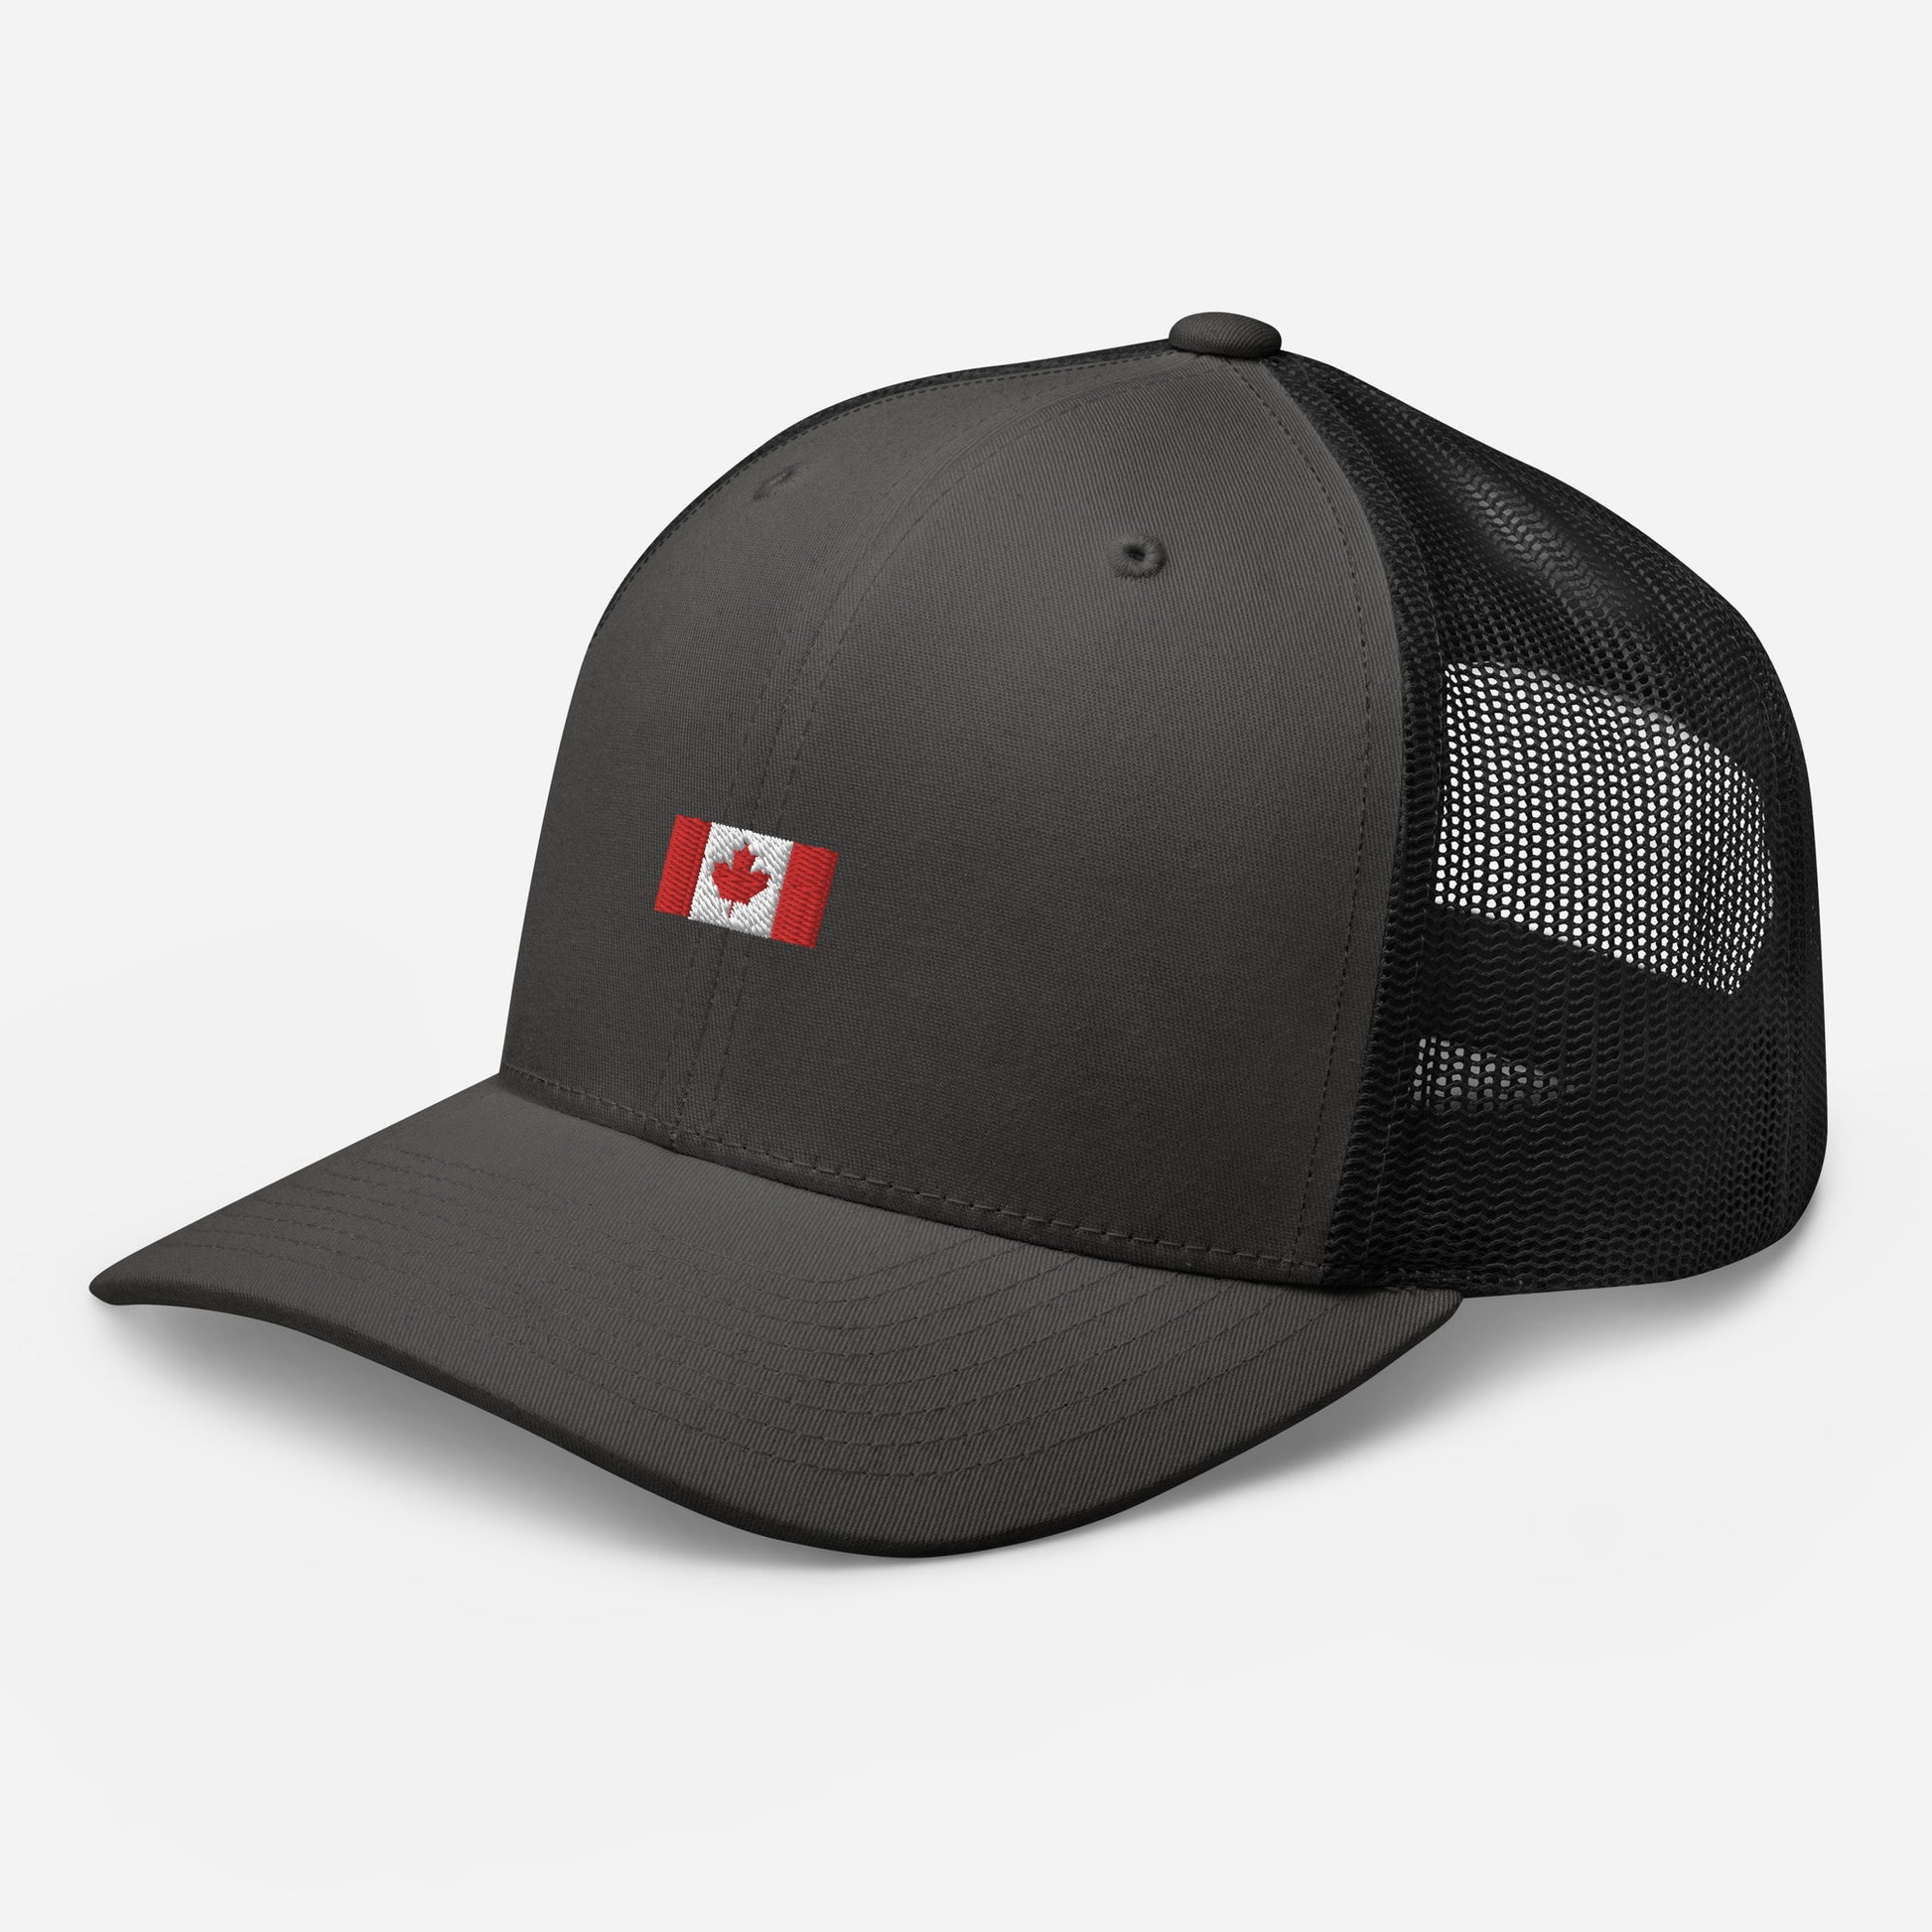 cap-from-the-front-with-canadian-flag